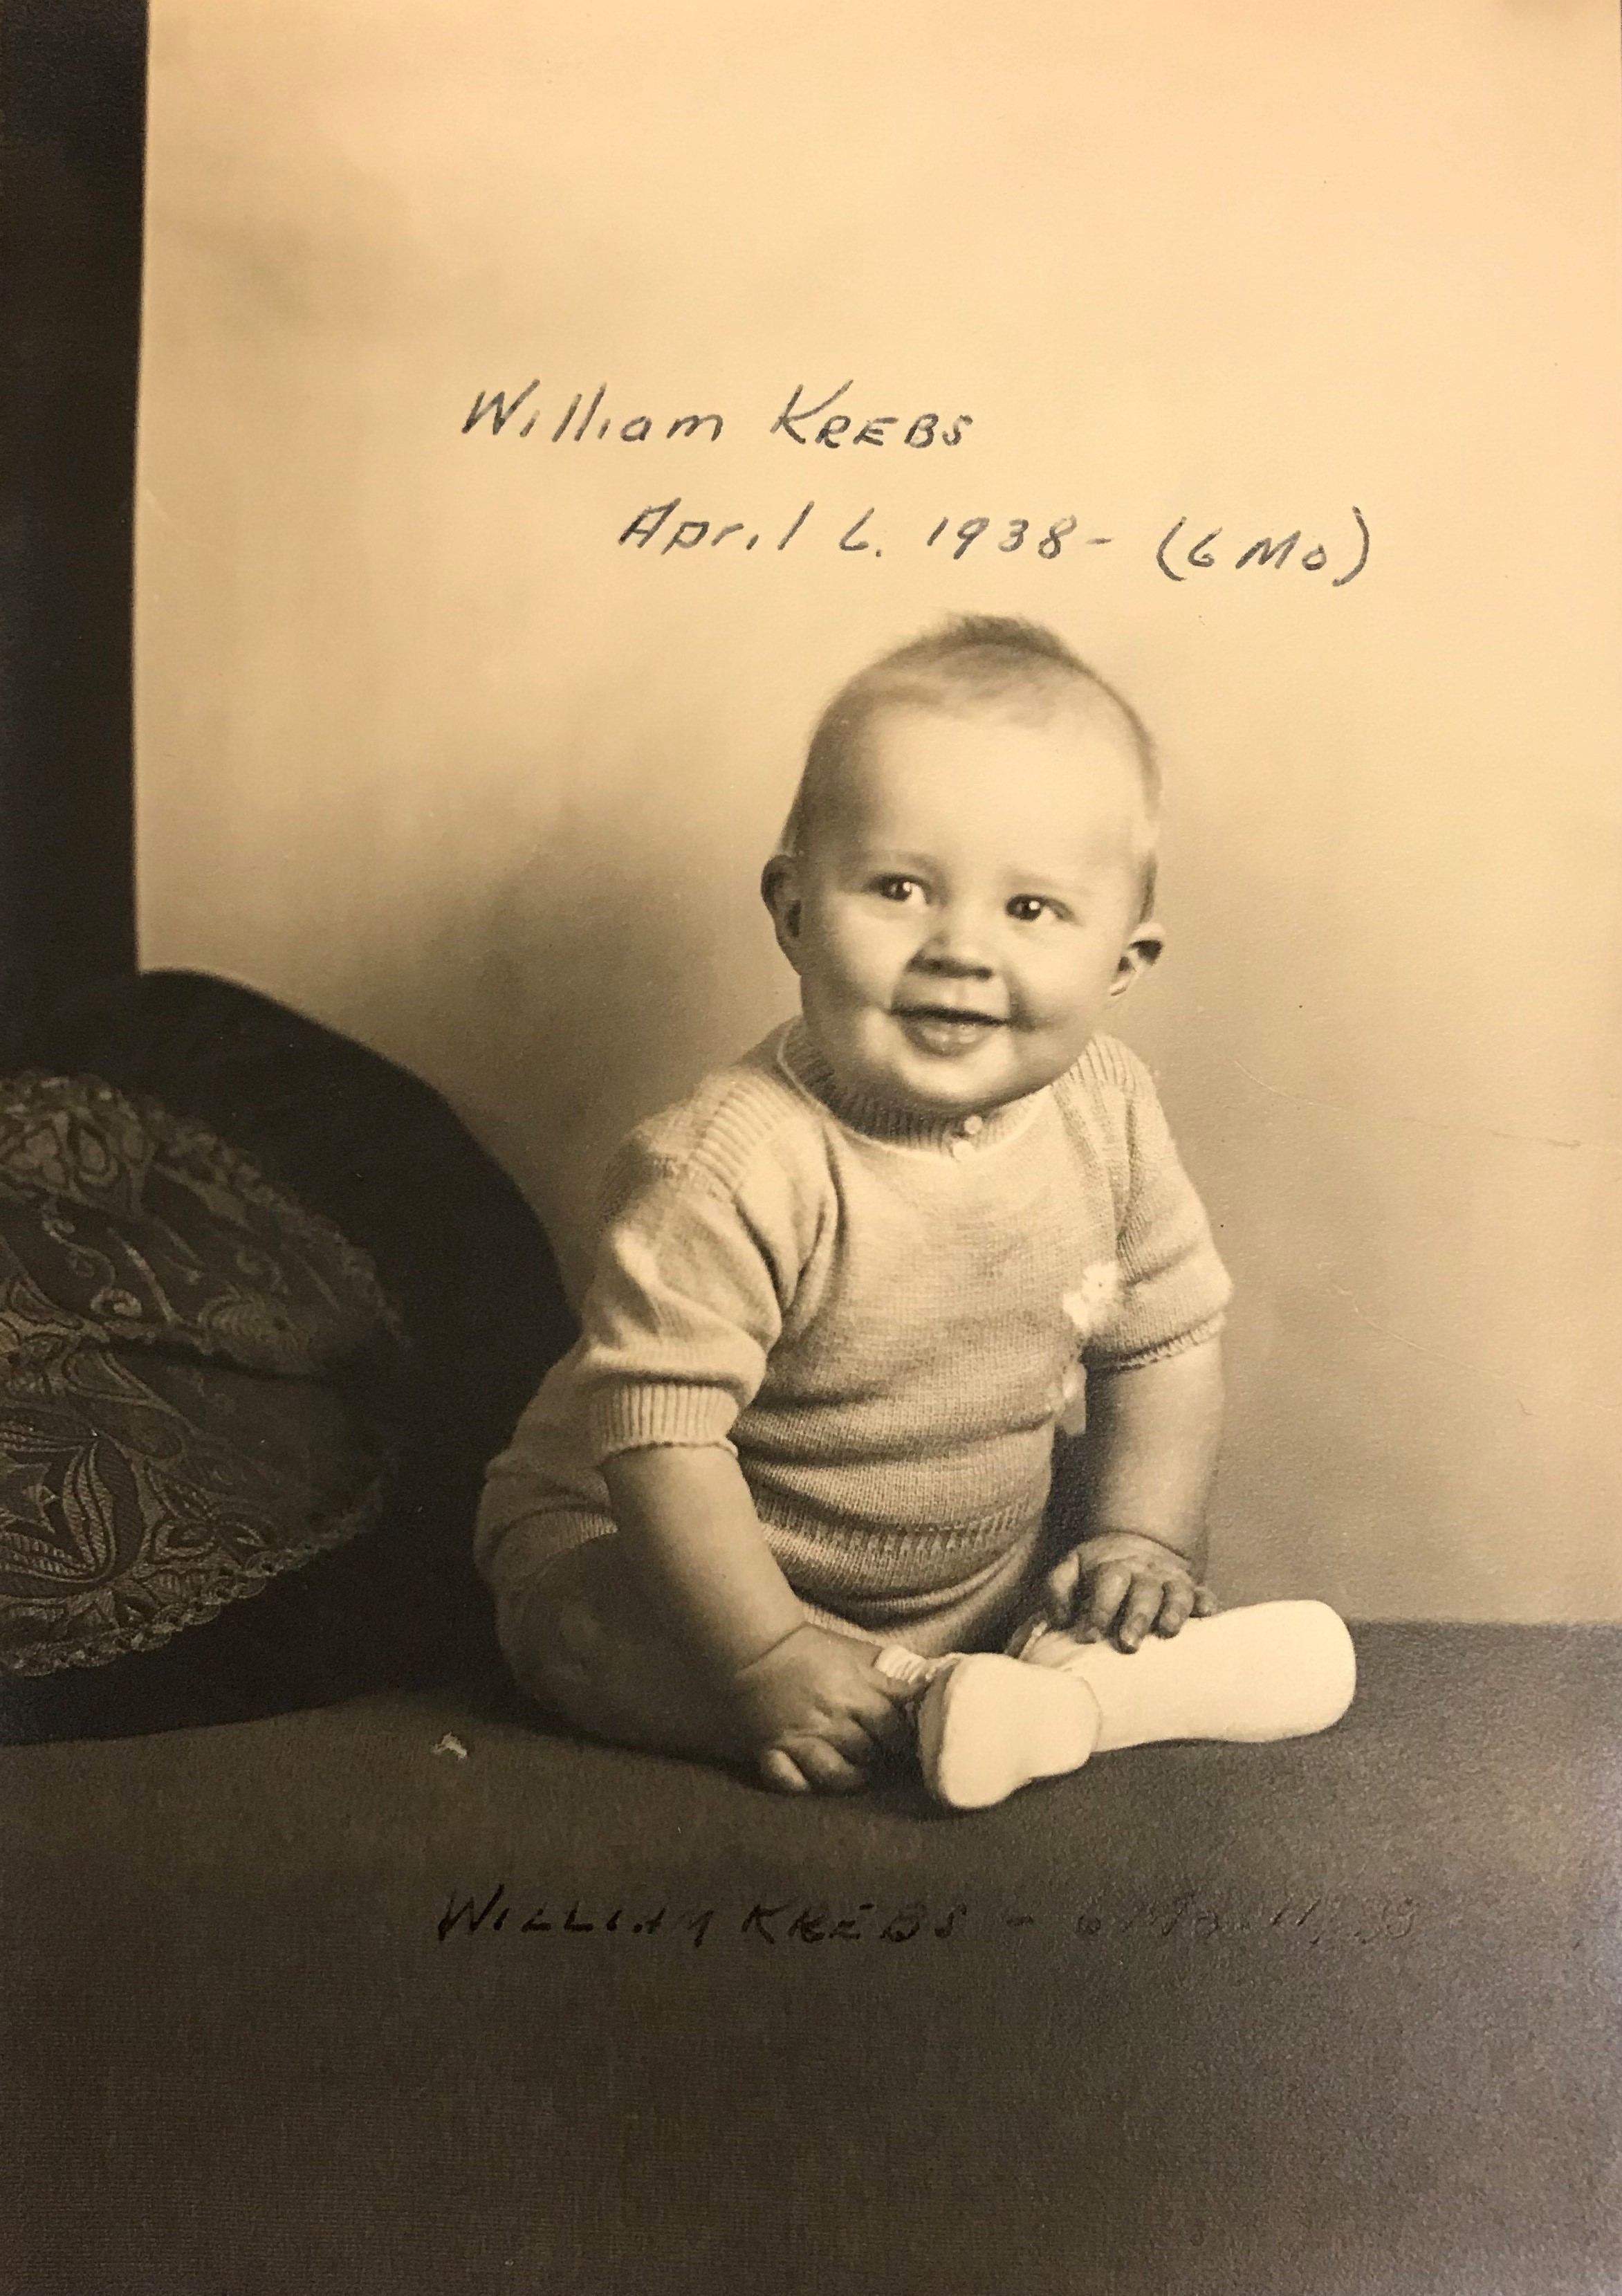 A baby poses for a photograph